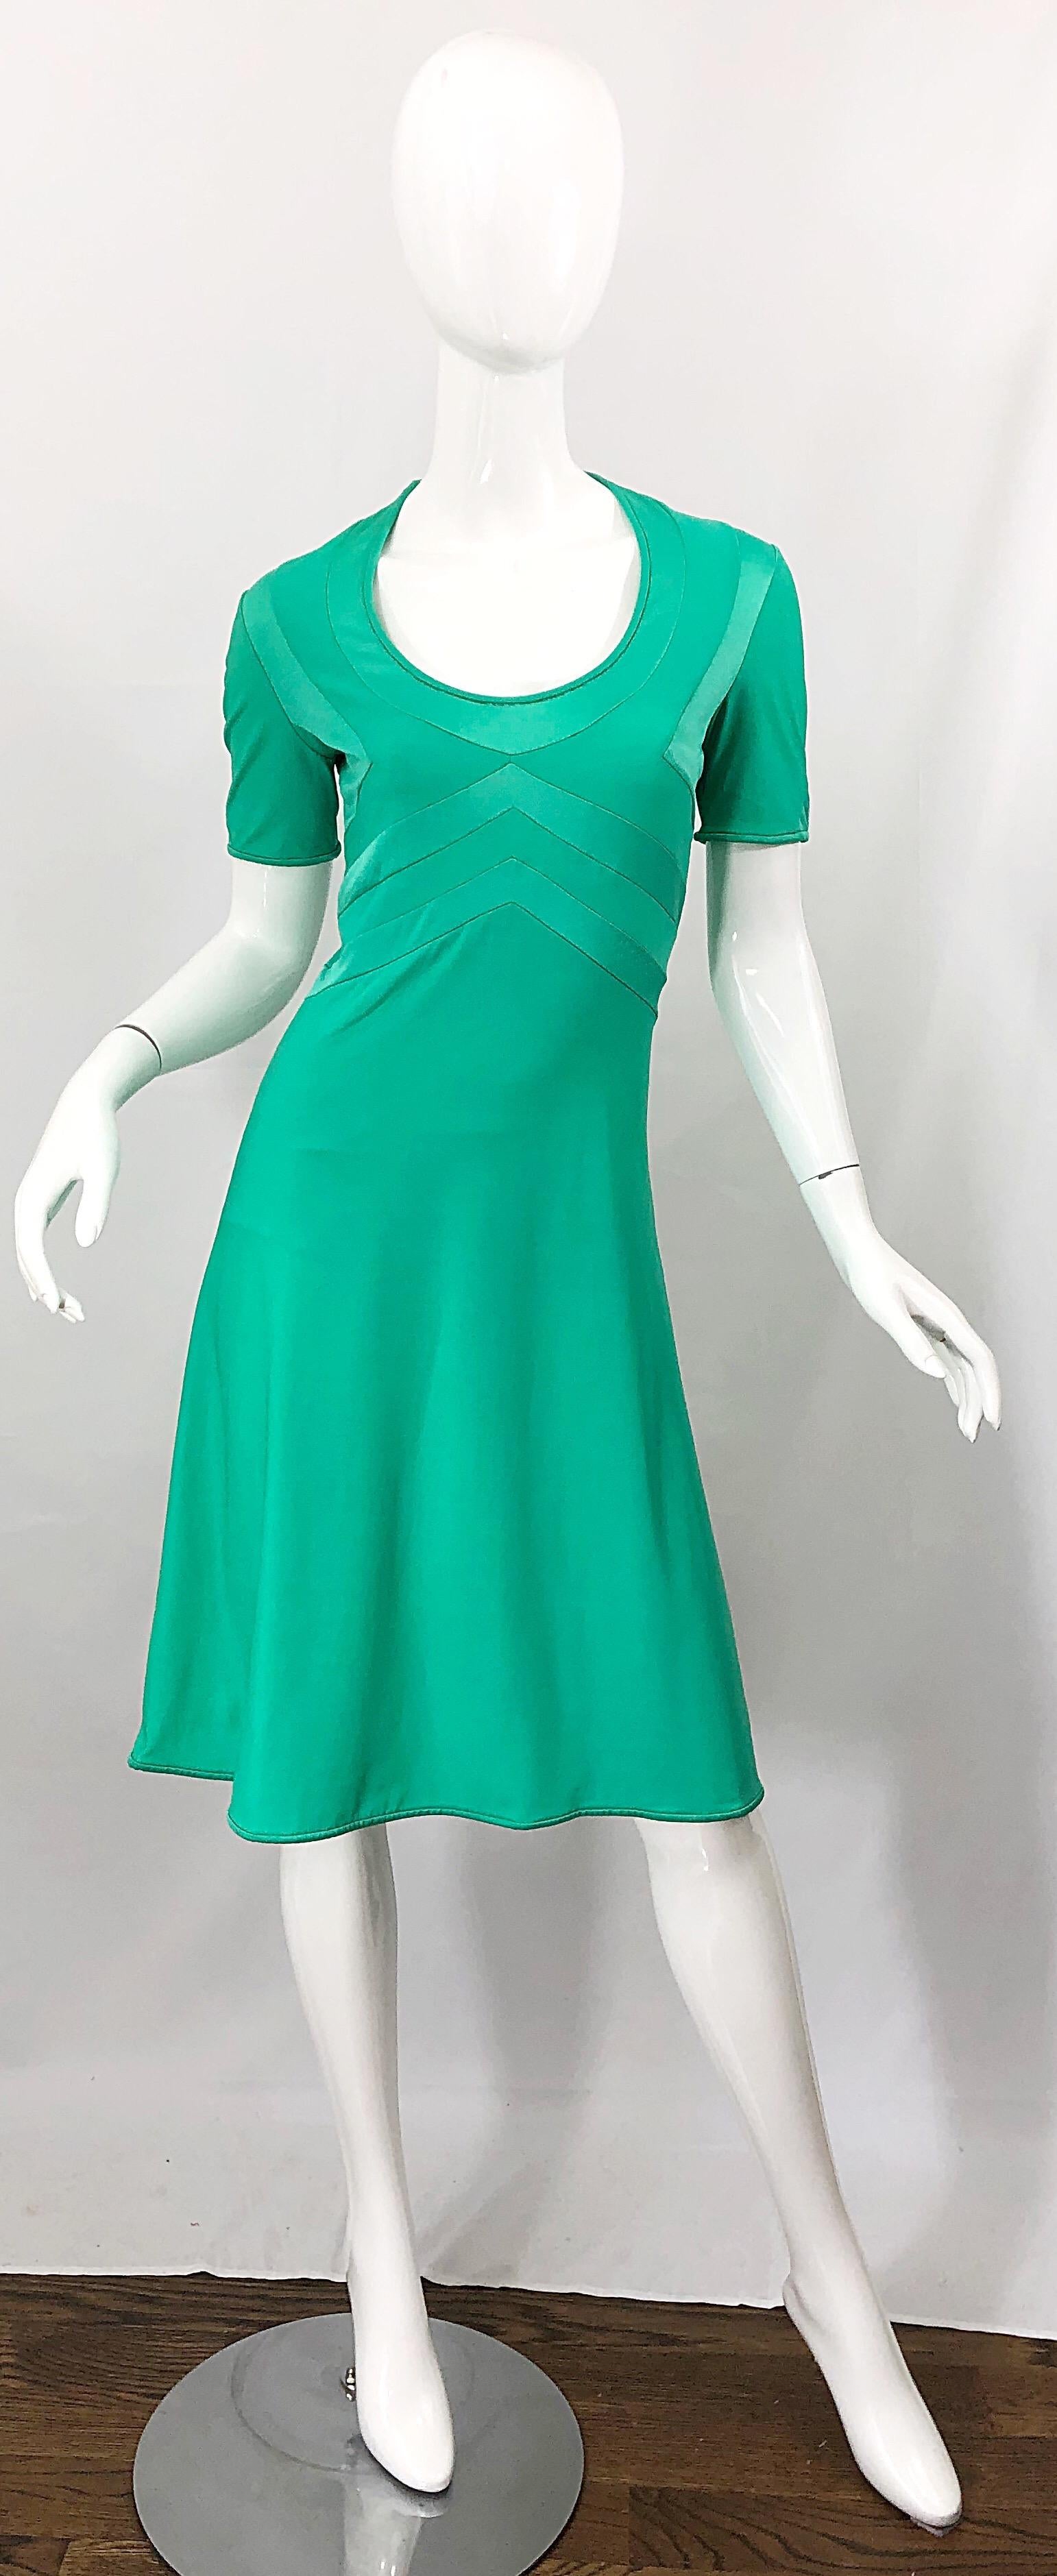 Chic mid 70s GIORGIO DI SANT ANGELO kelly green slinky short sleeve jersey bodysuit dress! Features flattering stitches on the bodice. Attactched bodysuit makes this rare gem perfect for the dance floor. Simply slips over the head and stretches to